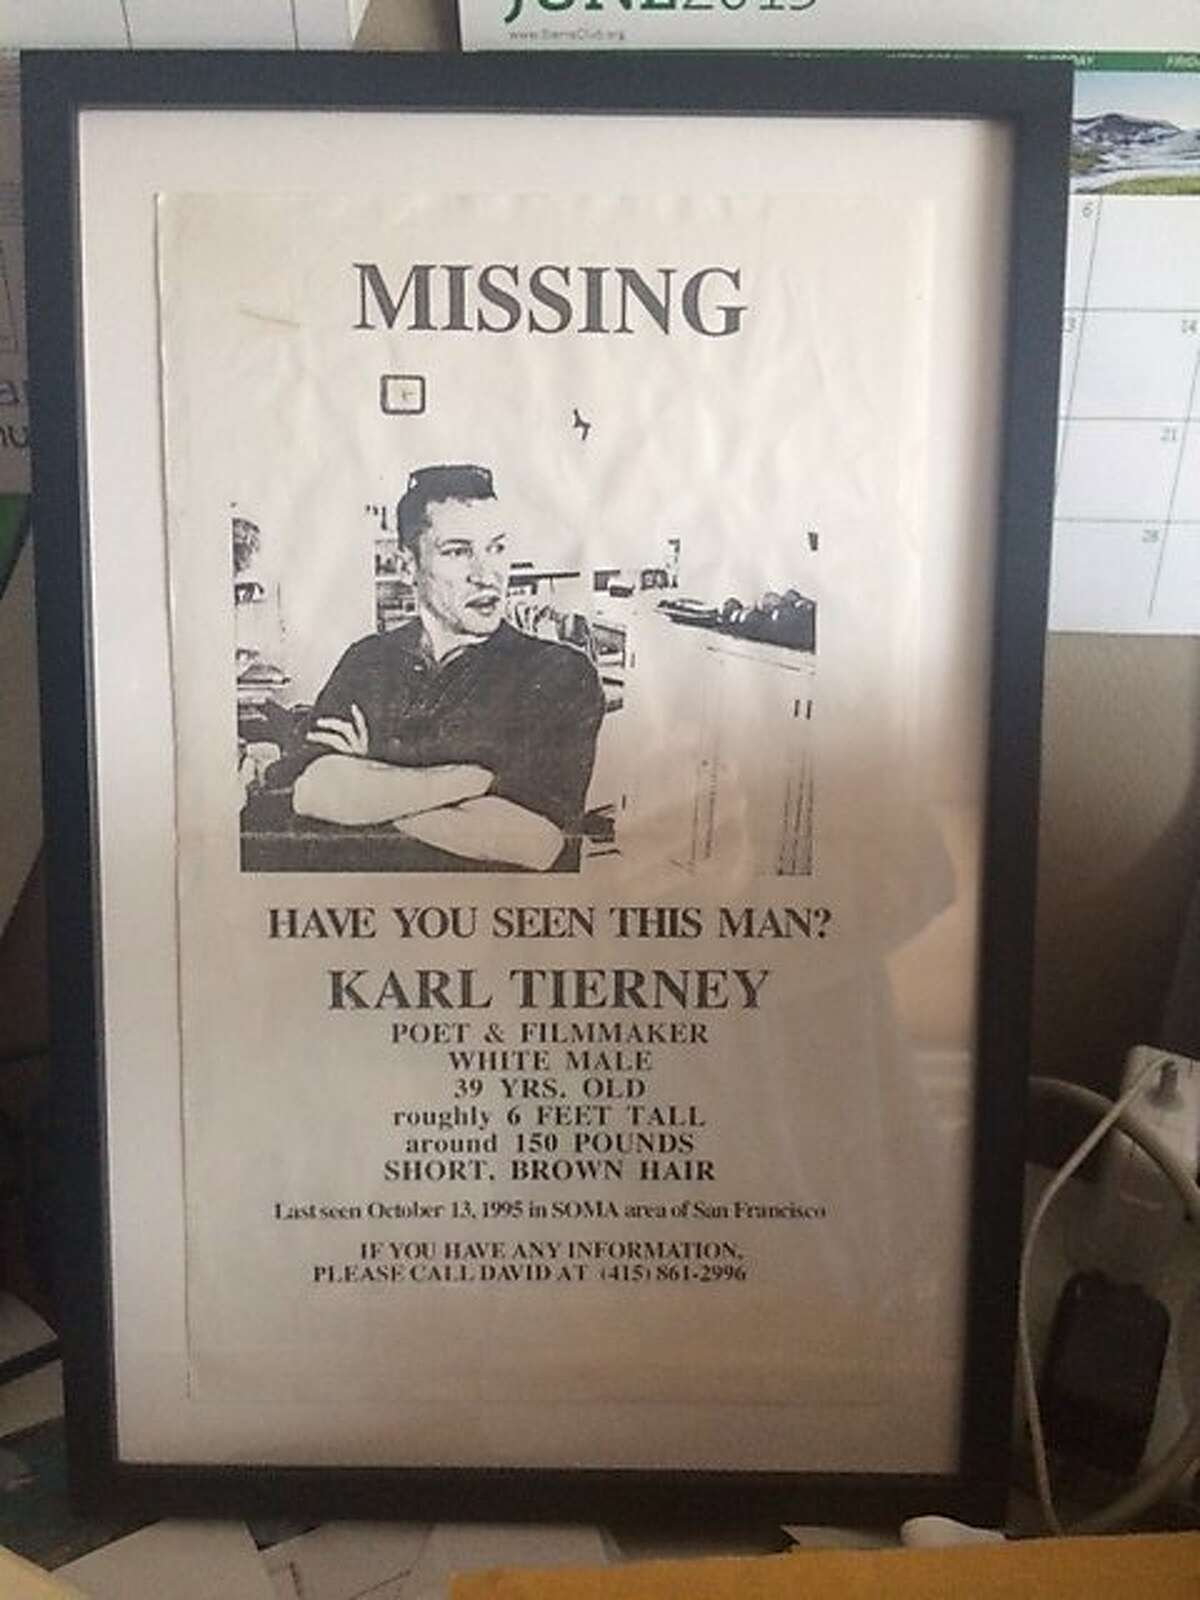 Jim Cory keeps a framed flyer posted in 1995 when he friend, Karl Tierney, went missing.